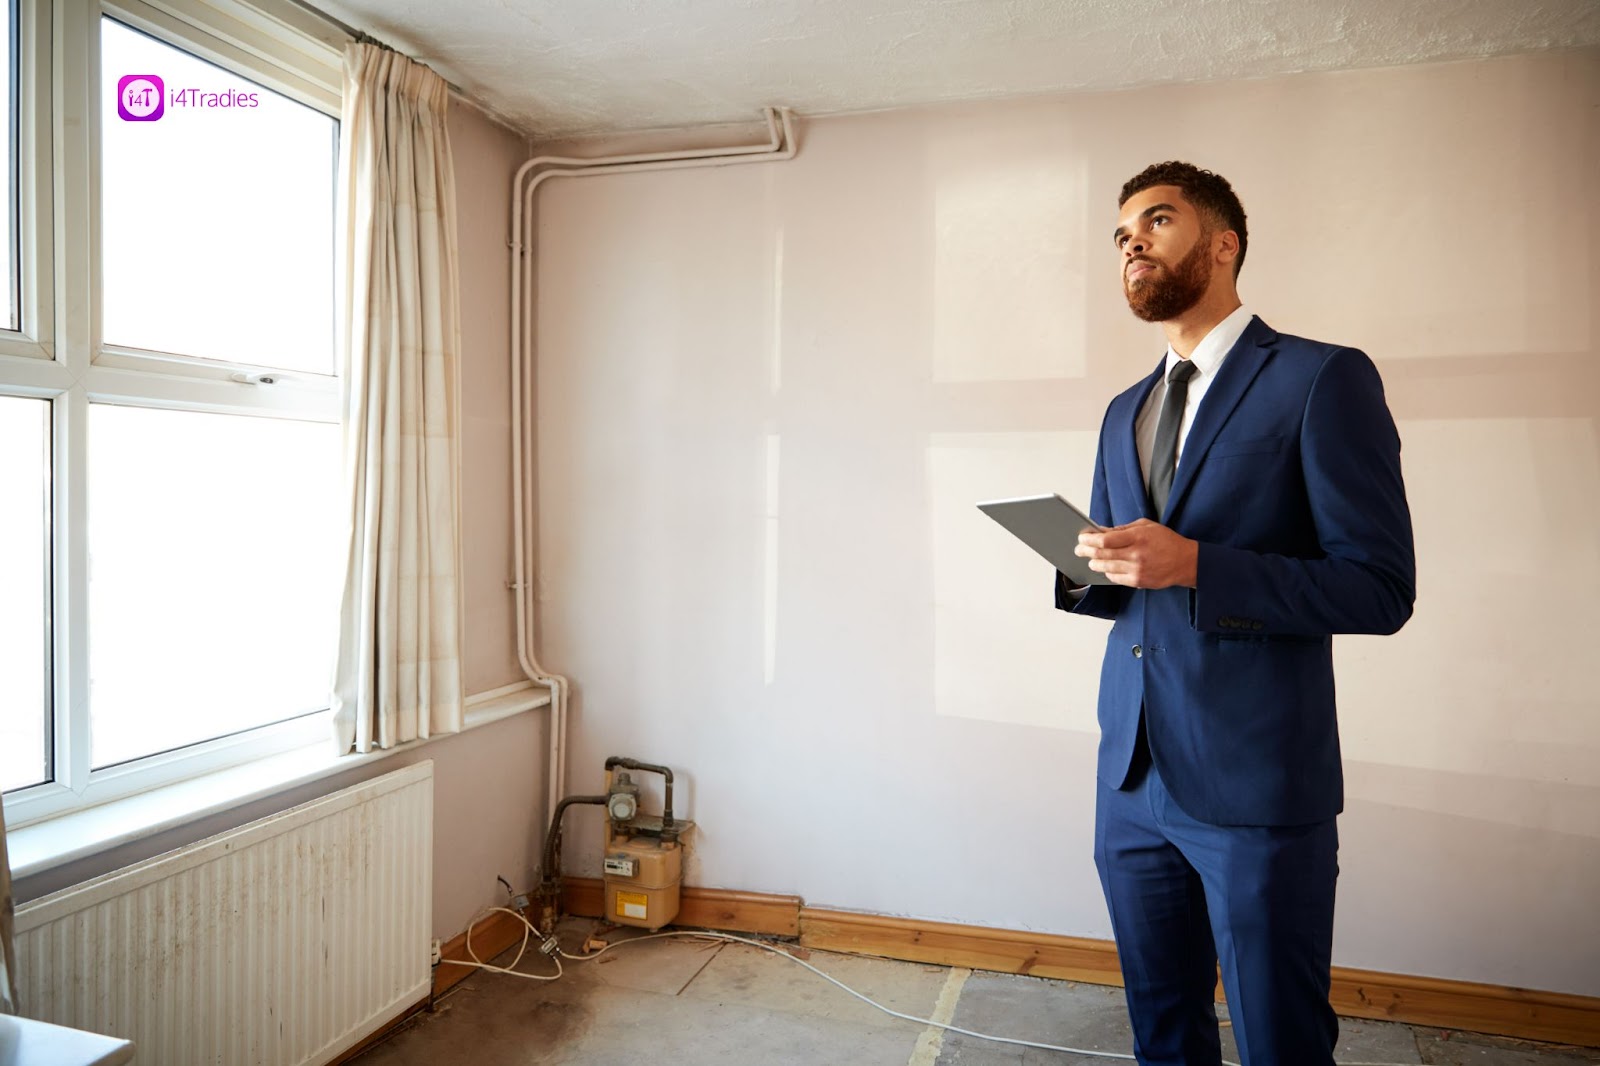 Benefits of routine inspections for landlords and tenants